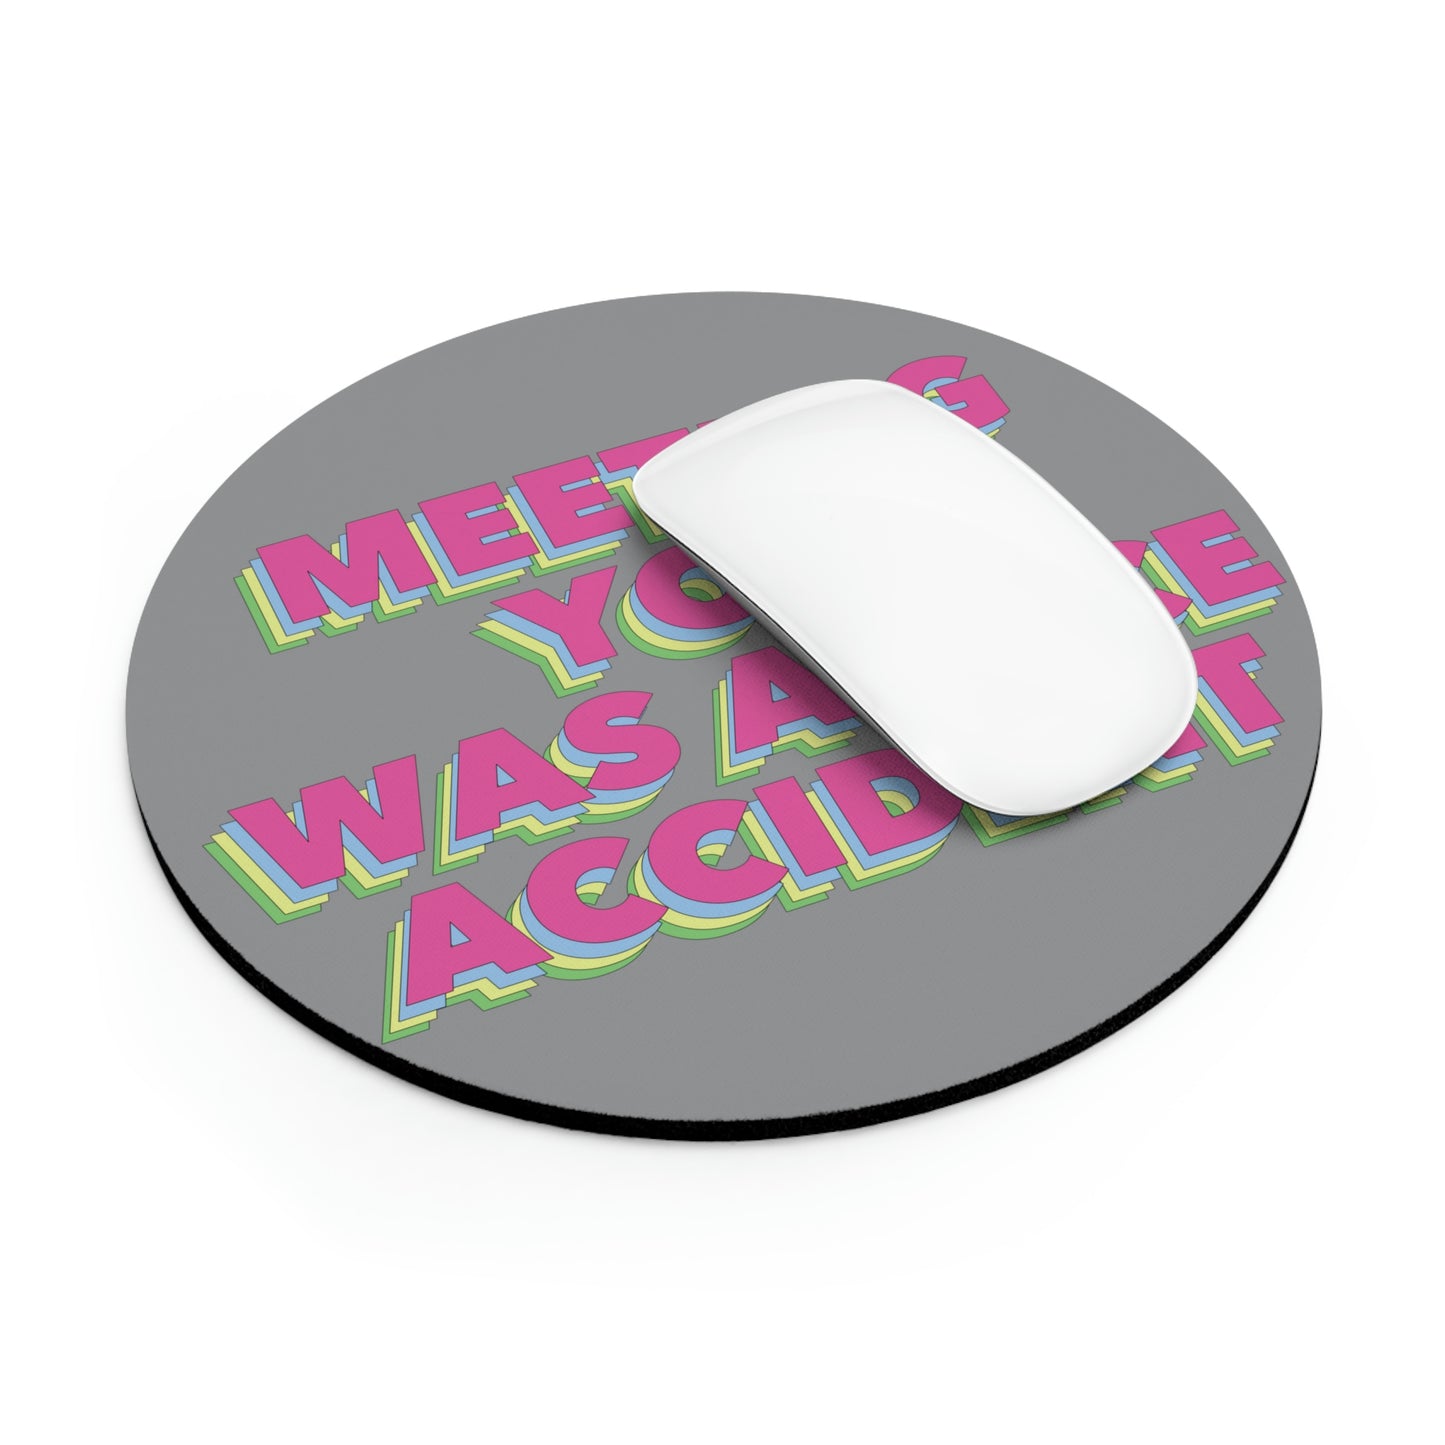 Meeting You Was A Nice Accident Humor Quotes Retro Text Ergonomic Non-slip Creative Design Mouse Pad